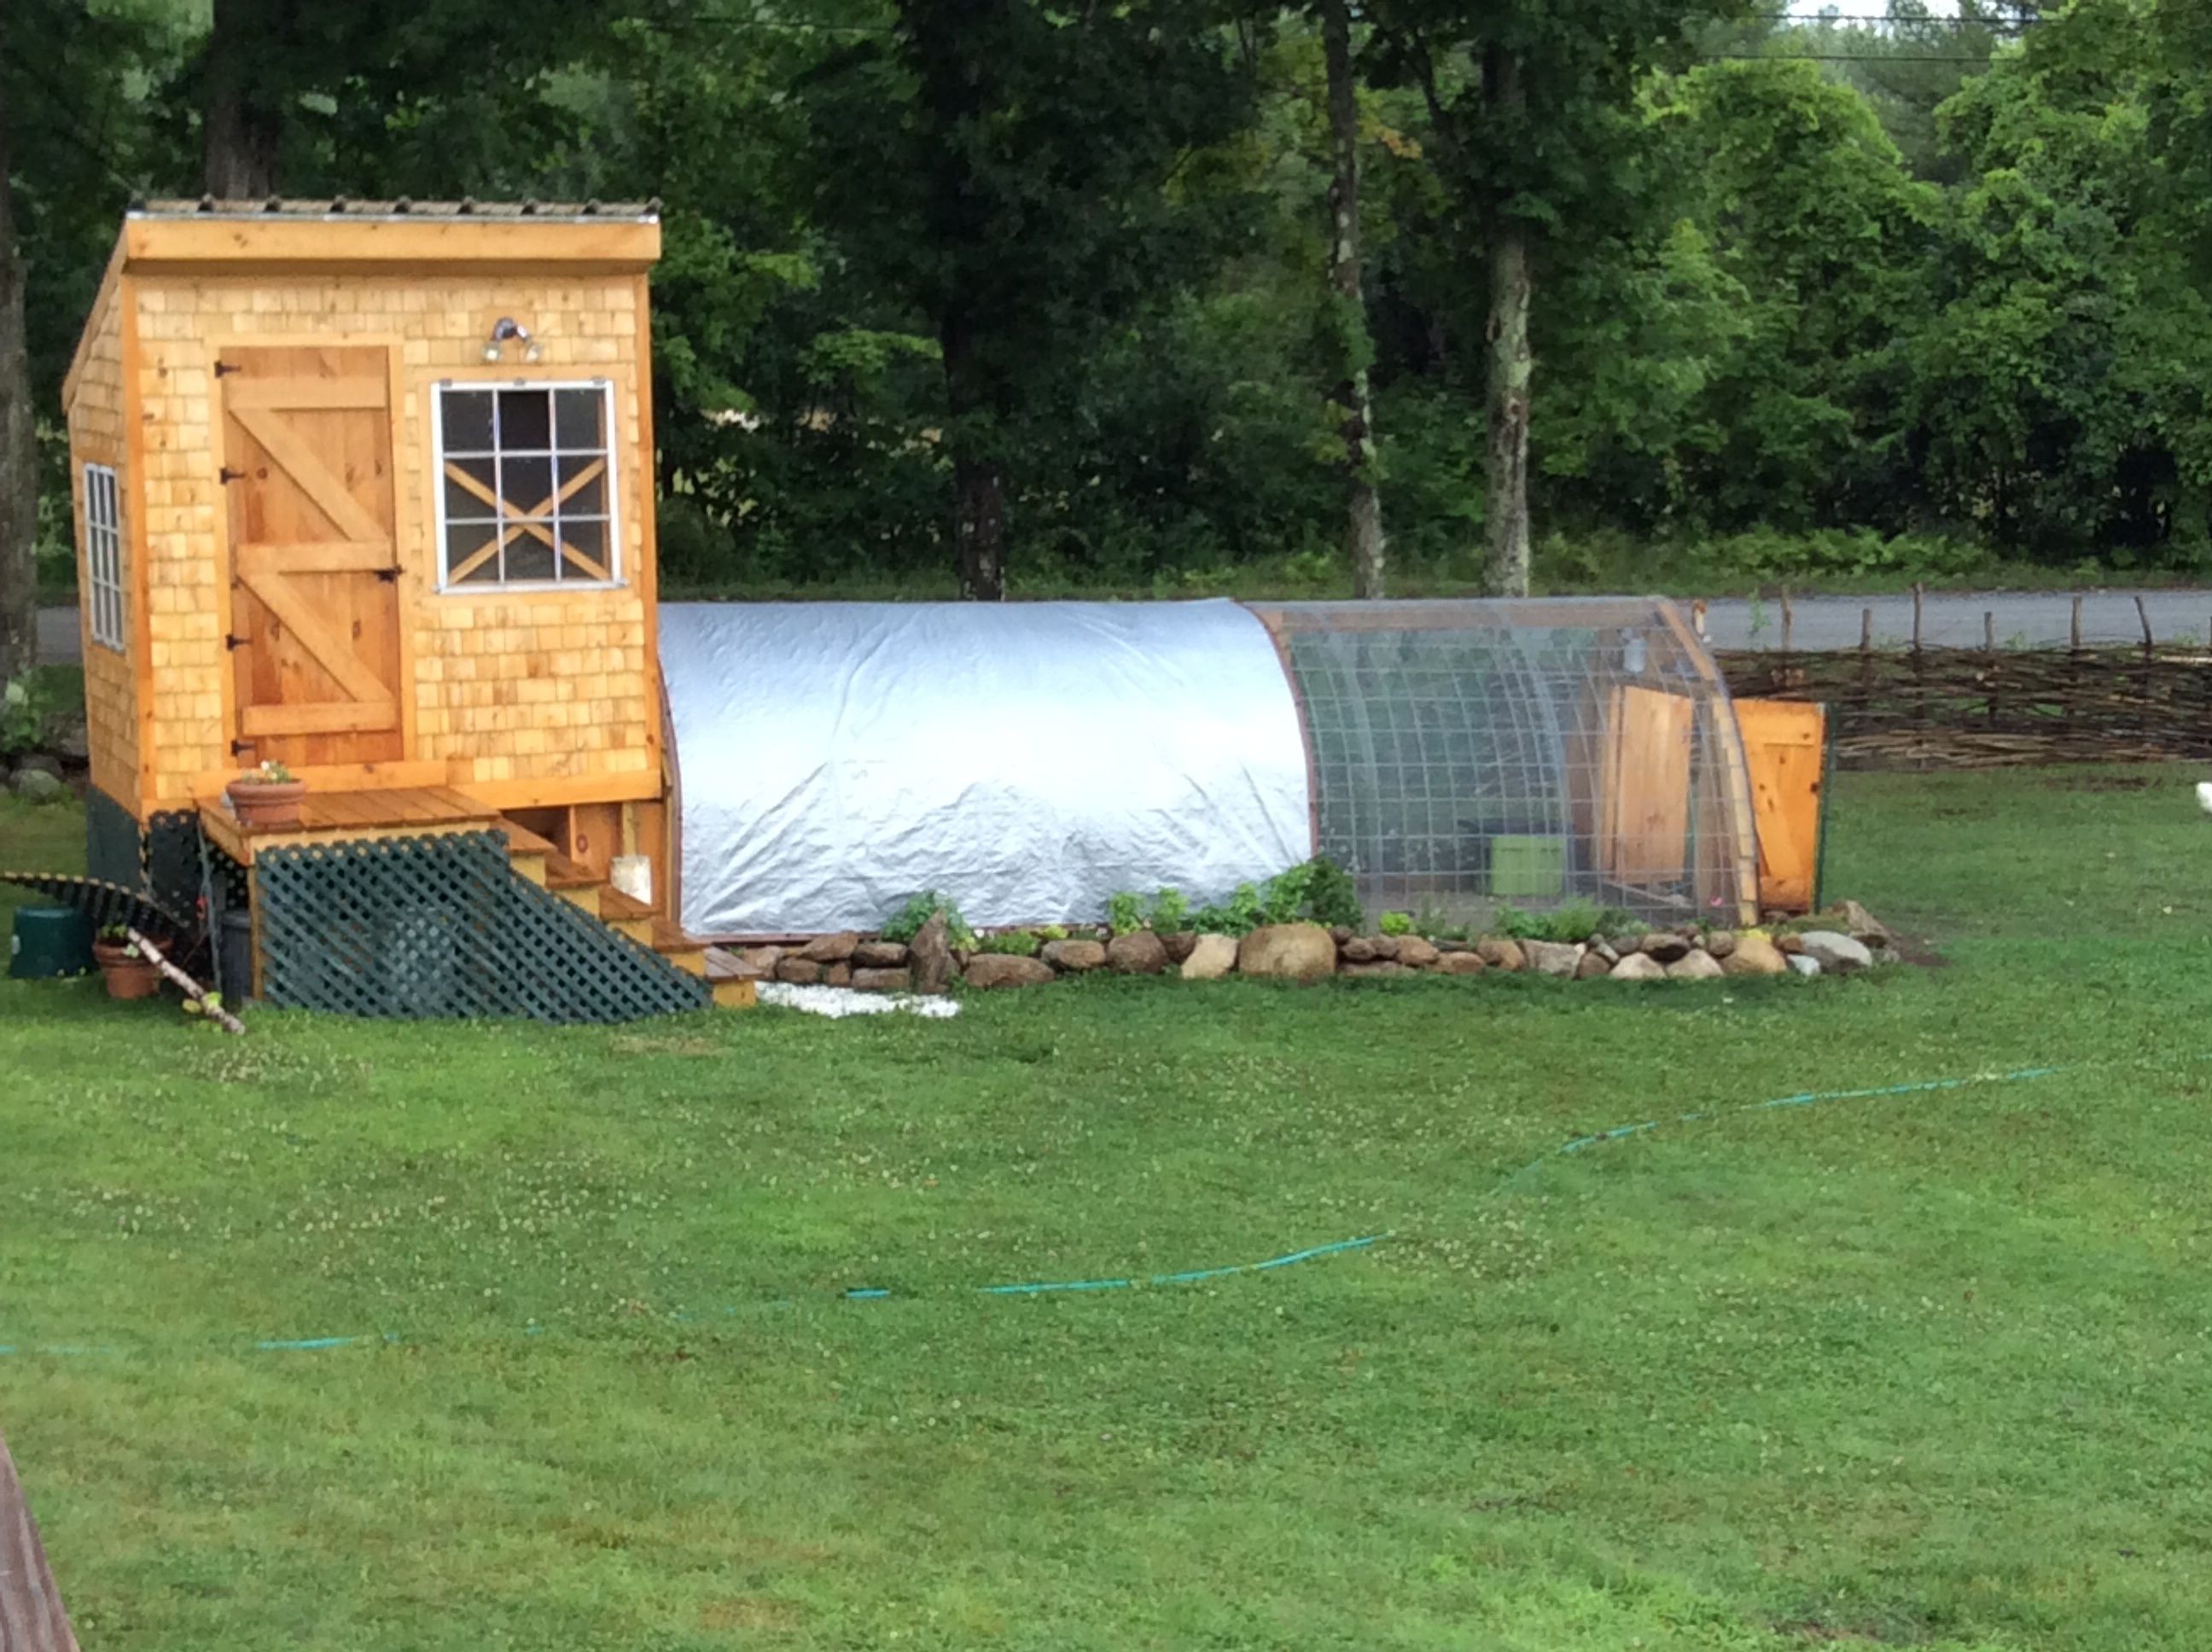 Our coop and run we build this spring. The run is cattle panels squeezed together with hard wear cloth covering the whole thing plus I planted my herd garden around the outside of it for the chickens. So love having the chickens and ducks hour of entertainment . Now just waiting for them to start laying!!